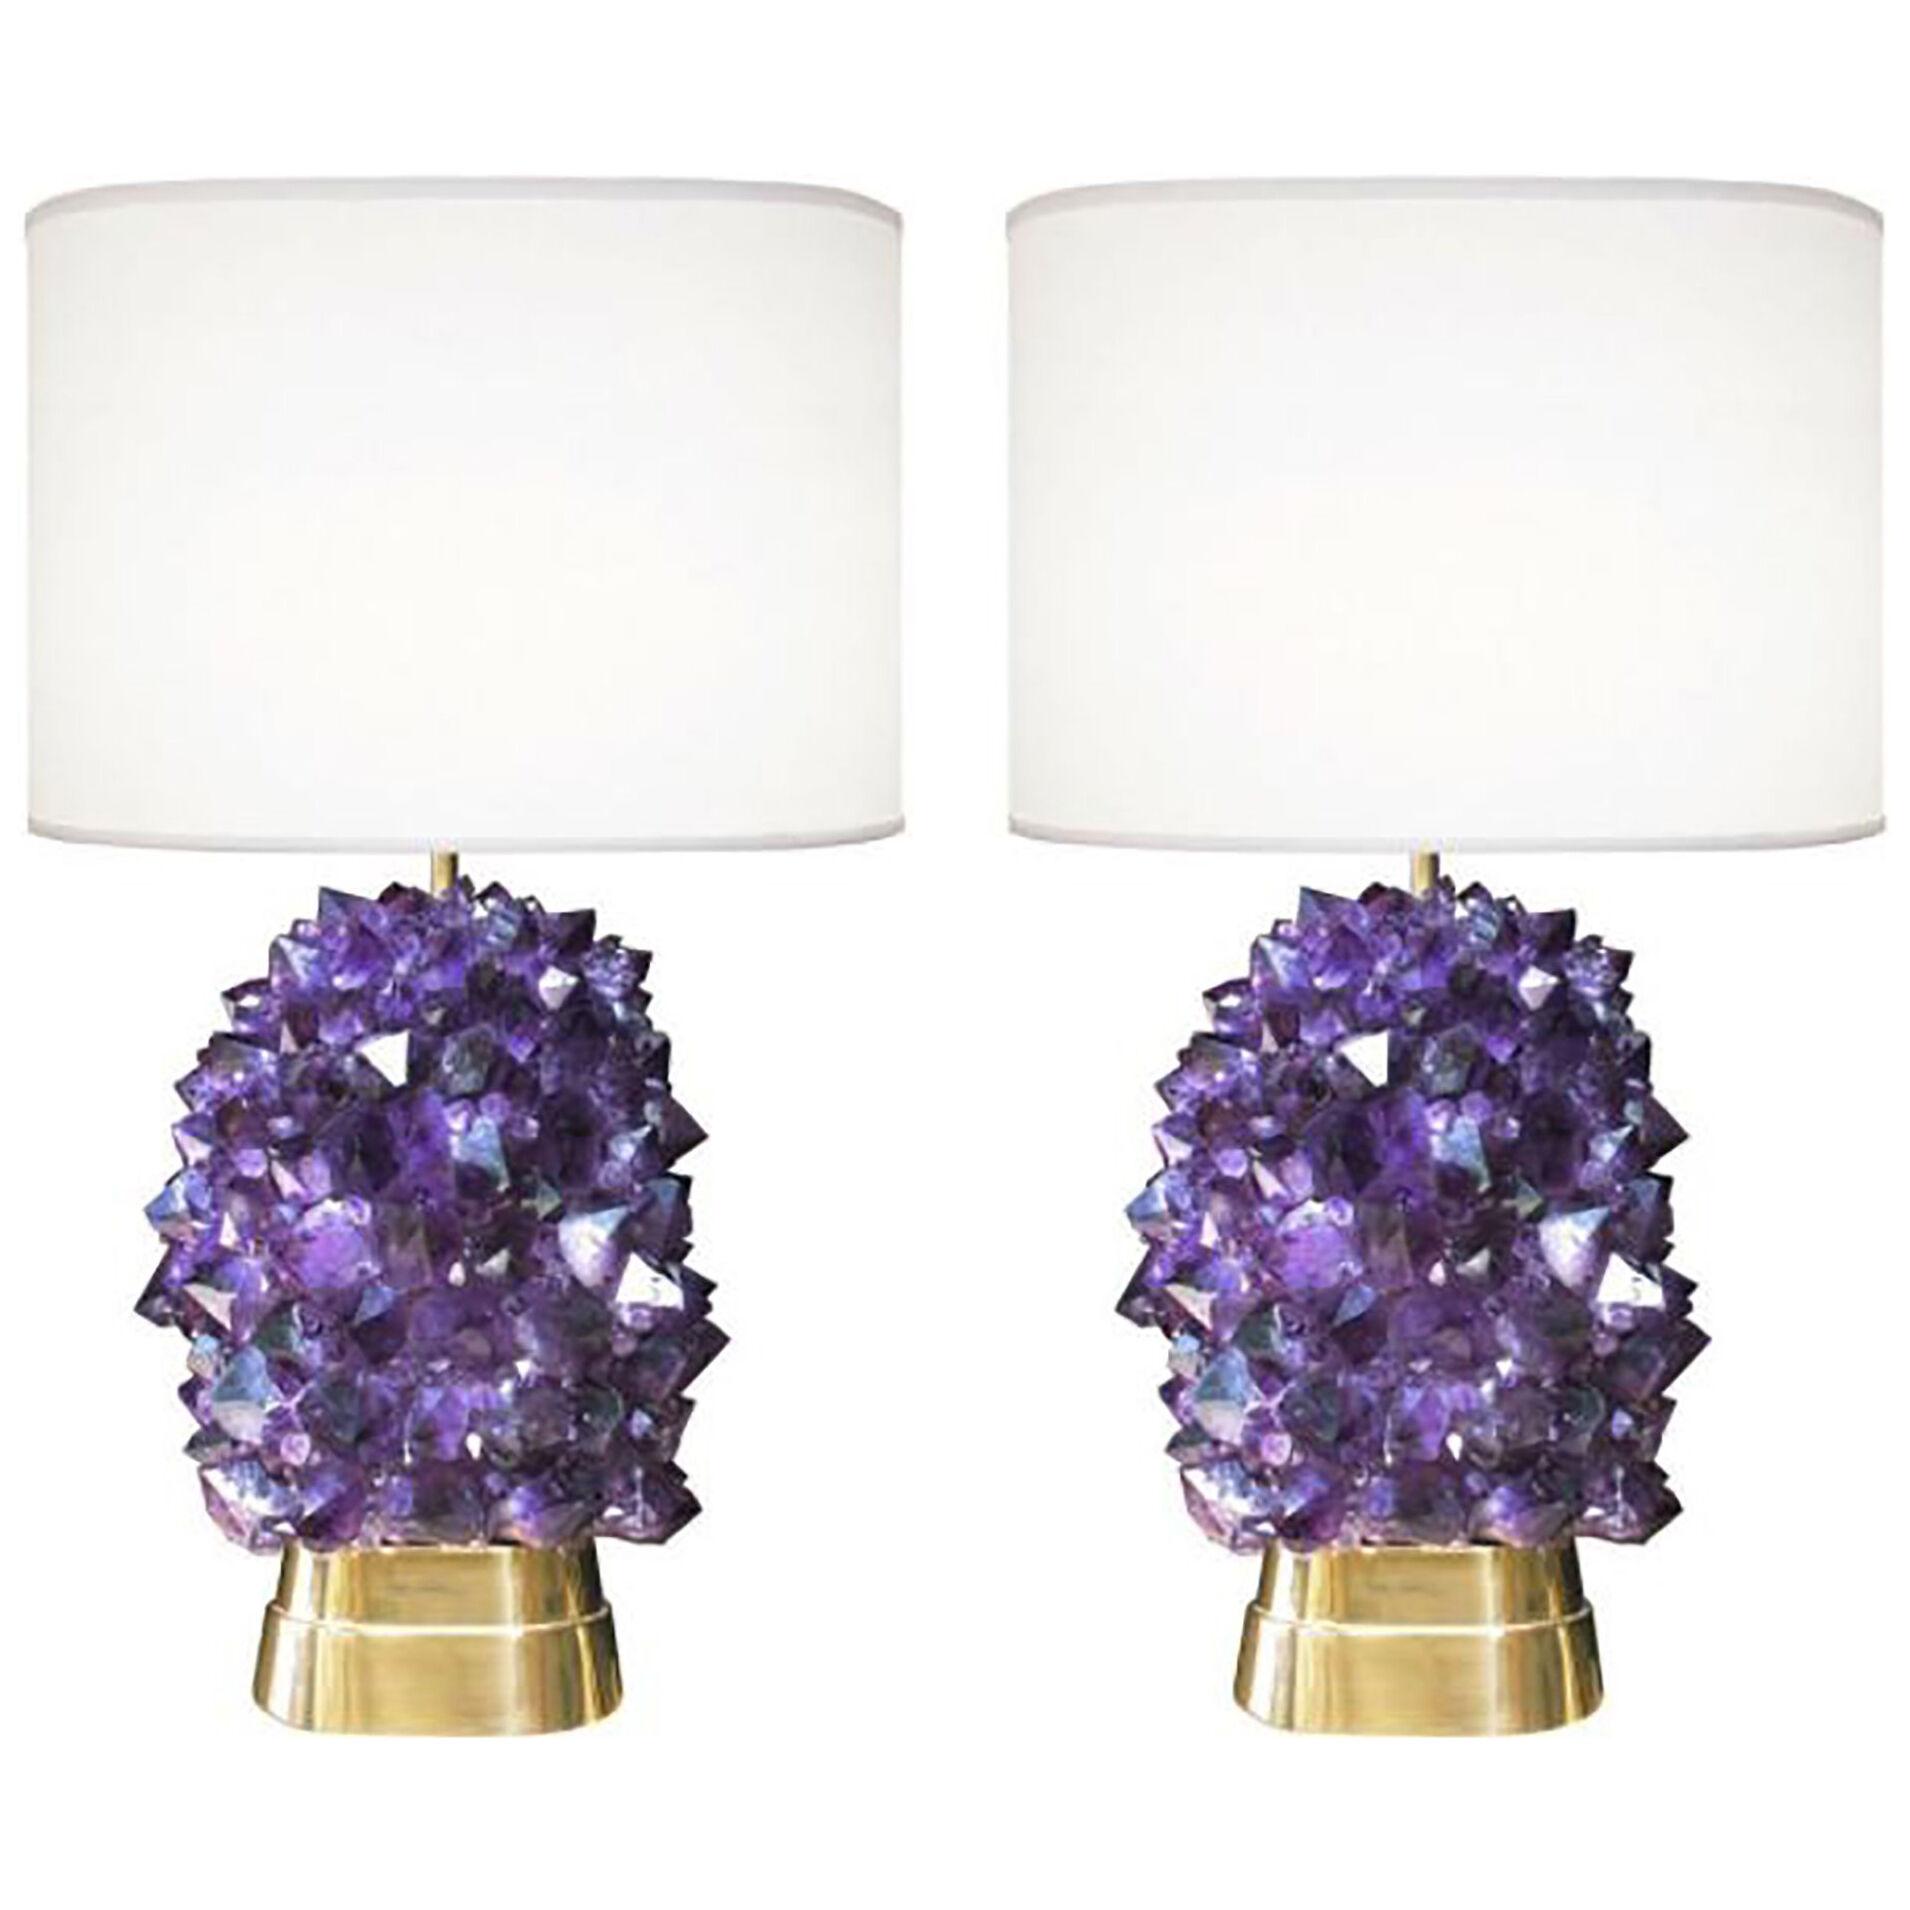 Pair of Amethyst and Bronze Lamps